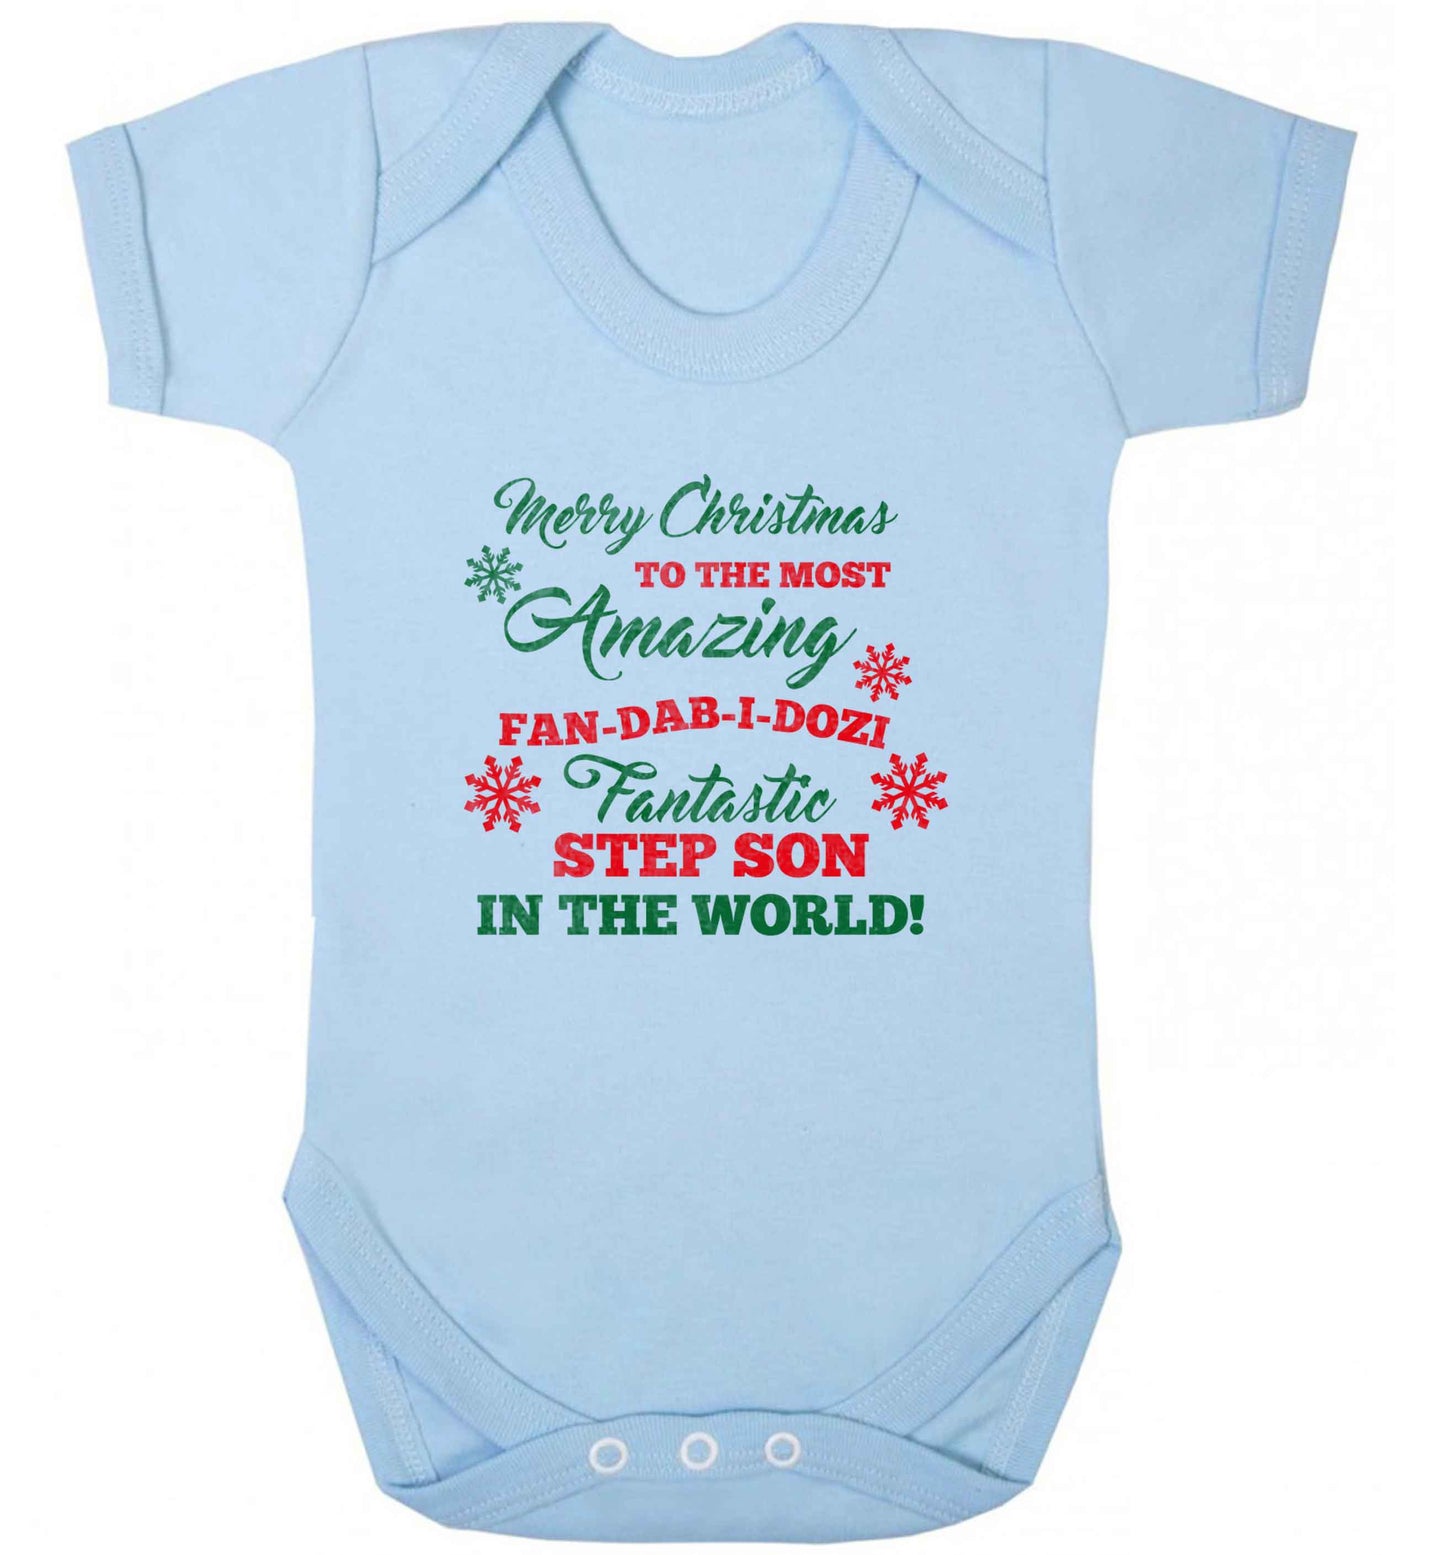 Merry Christmas to the most amazing fan-dab-i-dozi fantasic Step Son in the world baby vest pale blue 18-24 months